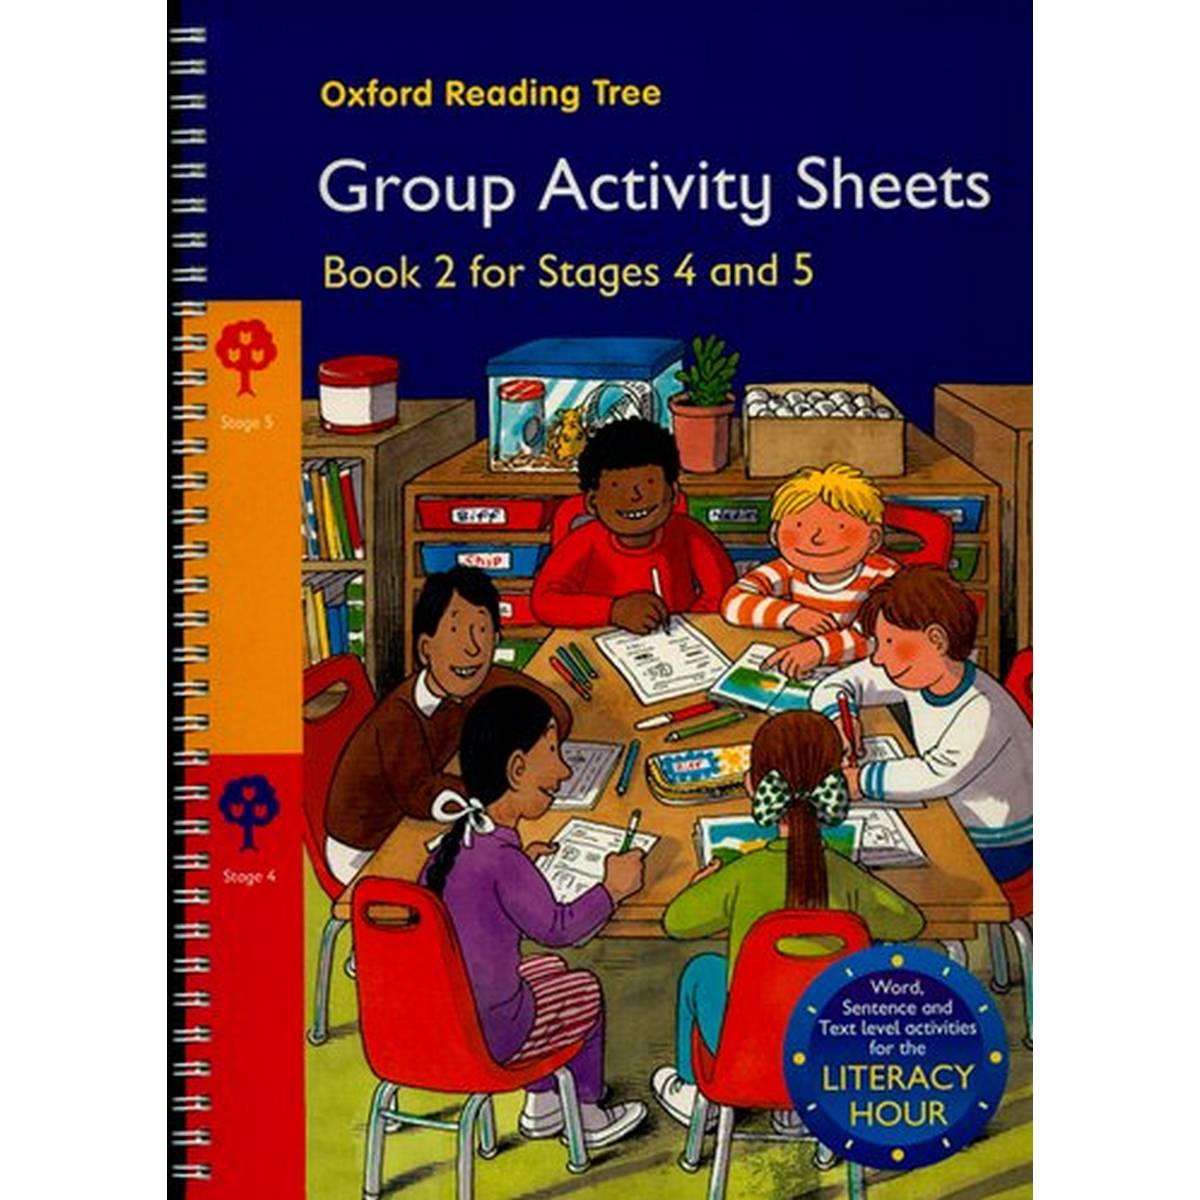 Oxford Reading Tree Stages 4-5 Book 2 Group Activity Sheets